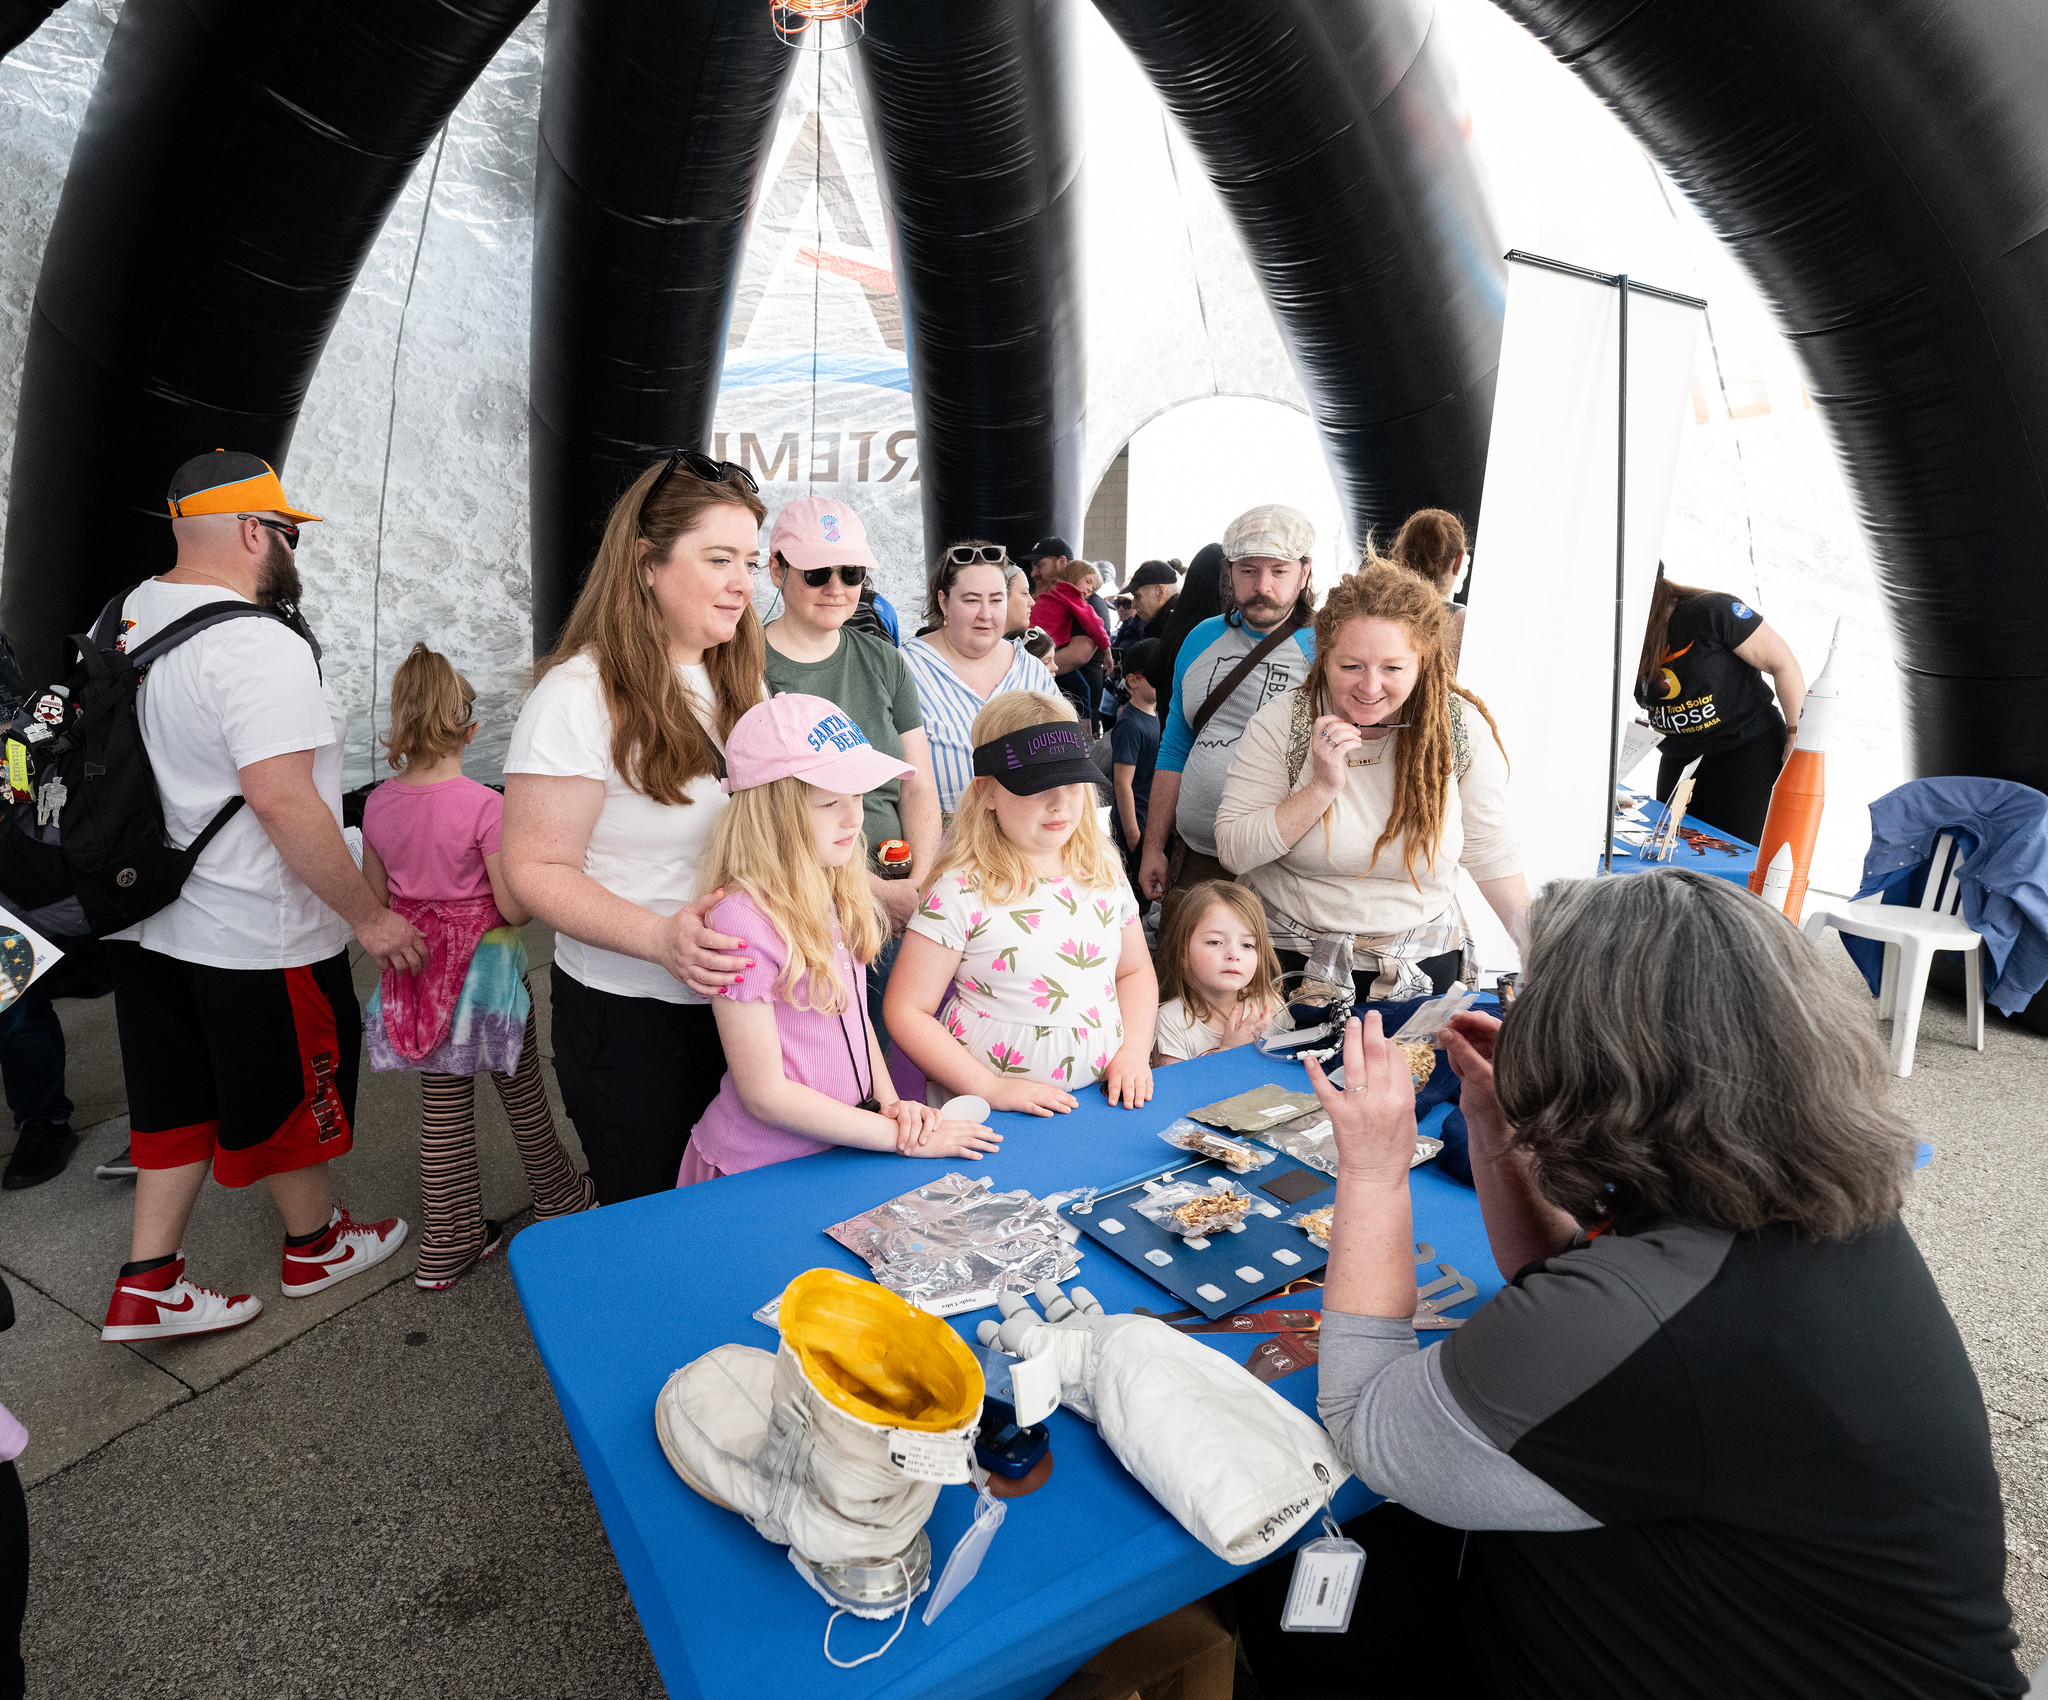 A group of children and adults stand in front of a table. On the other side of the table a person is holding a small clear bag with small brown, indistinguishable objects in side. On the table are an astronauts boot, gloves, eclipse glasses, and other indistinguishable items.